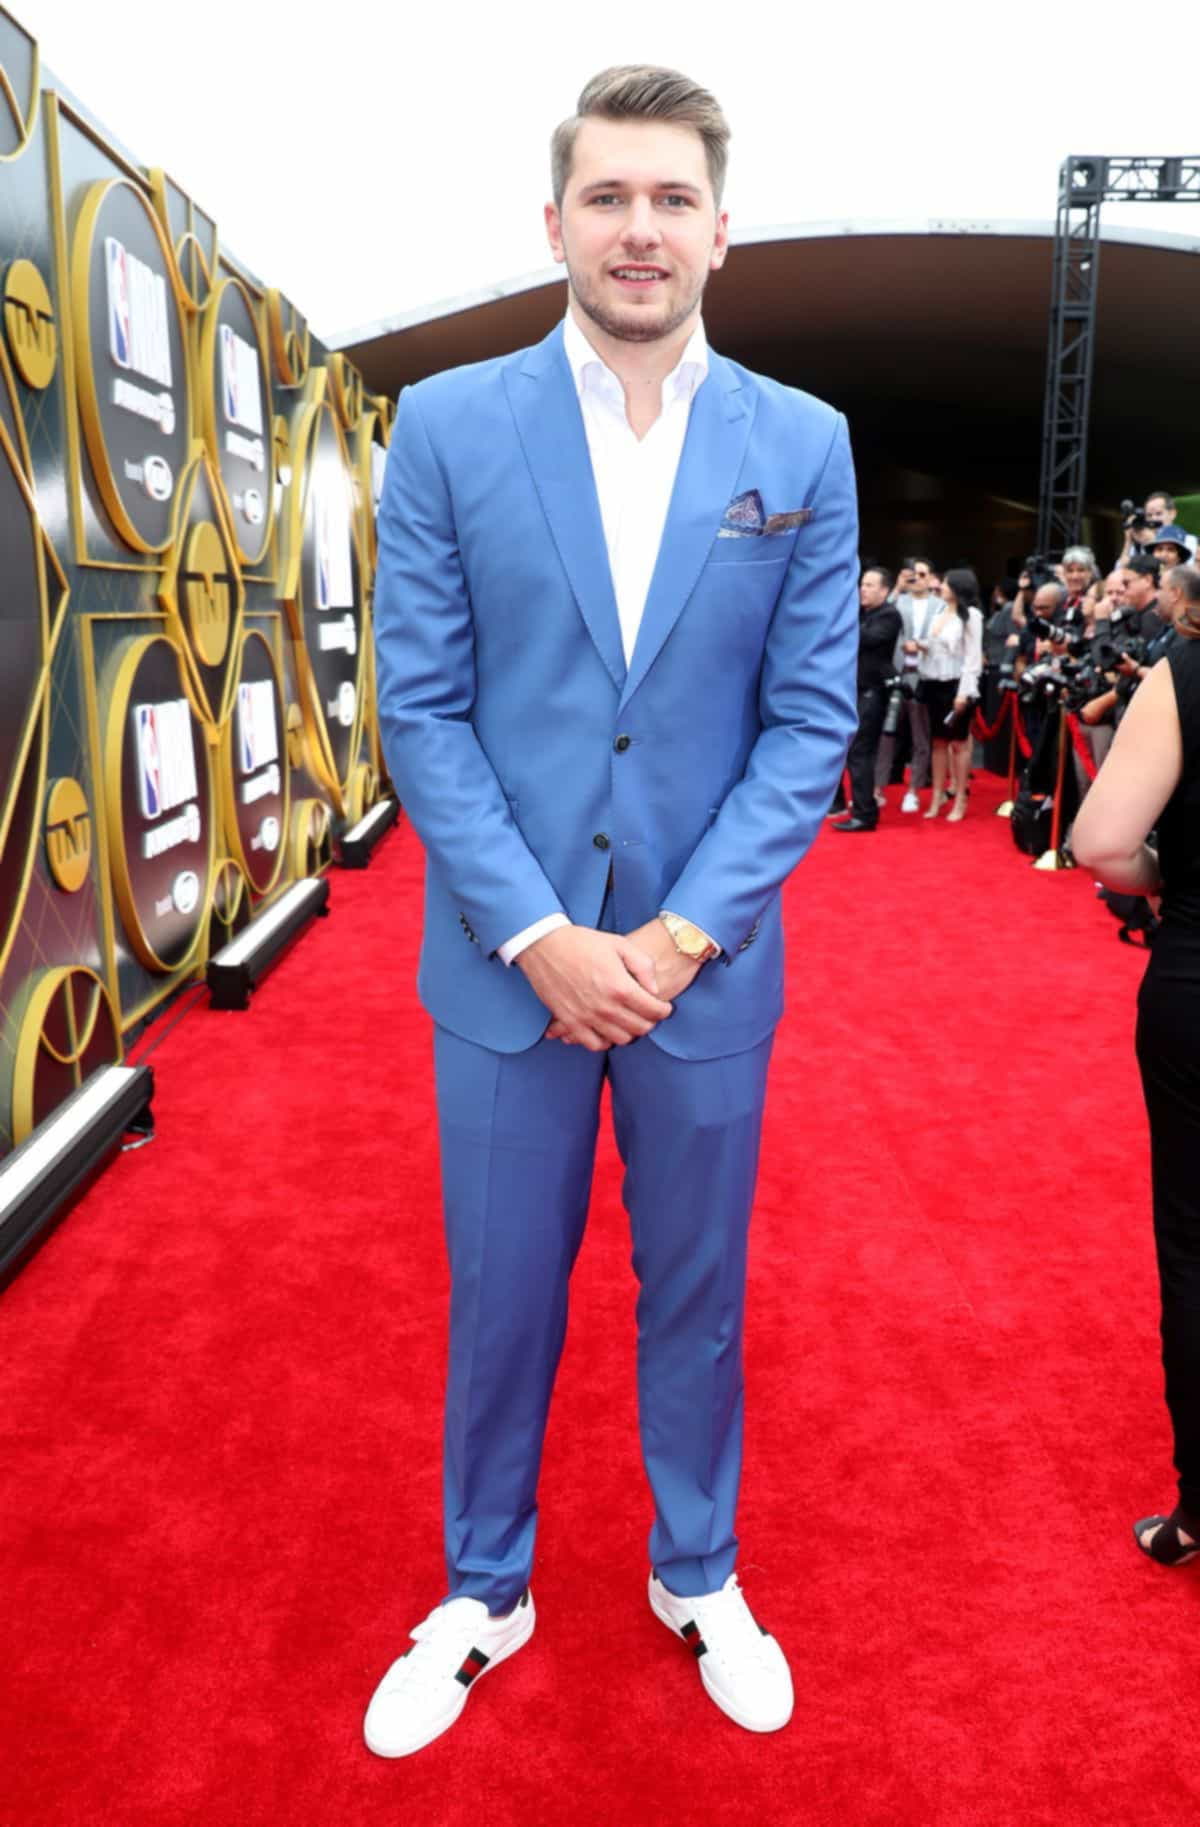 2019 NBA Awards Presented By Kia On TNT - Red Carpet